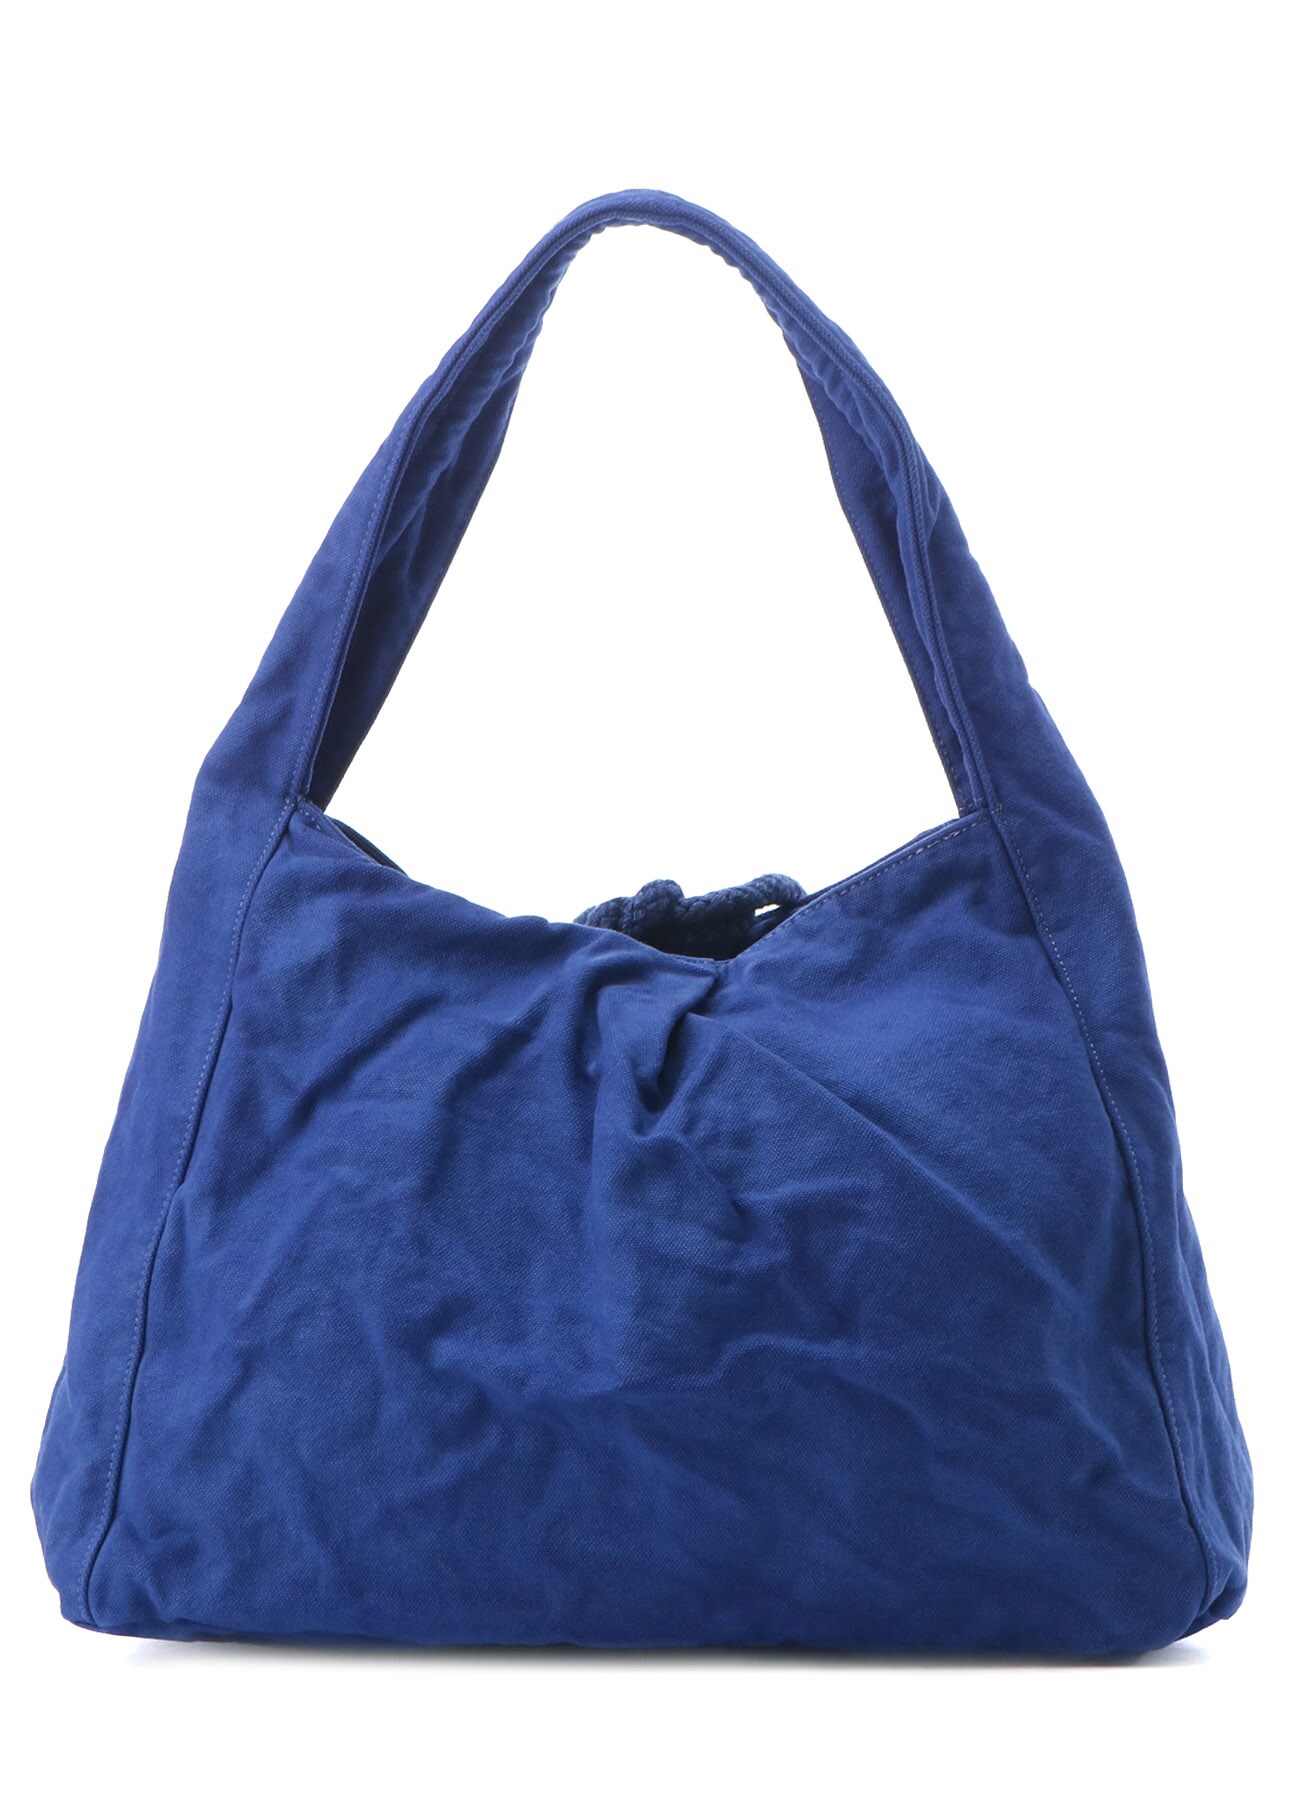 CANVAS PRODUCT DYE LINEN CORD TOTE BAG